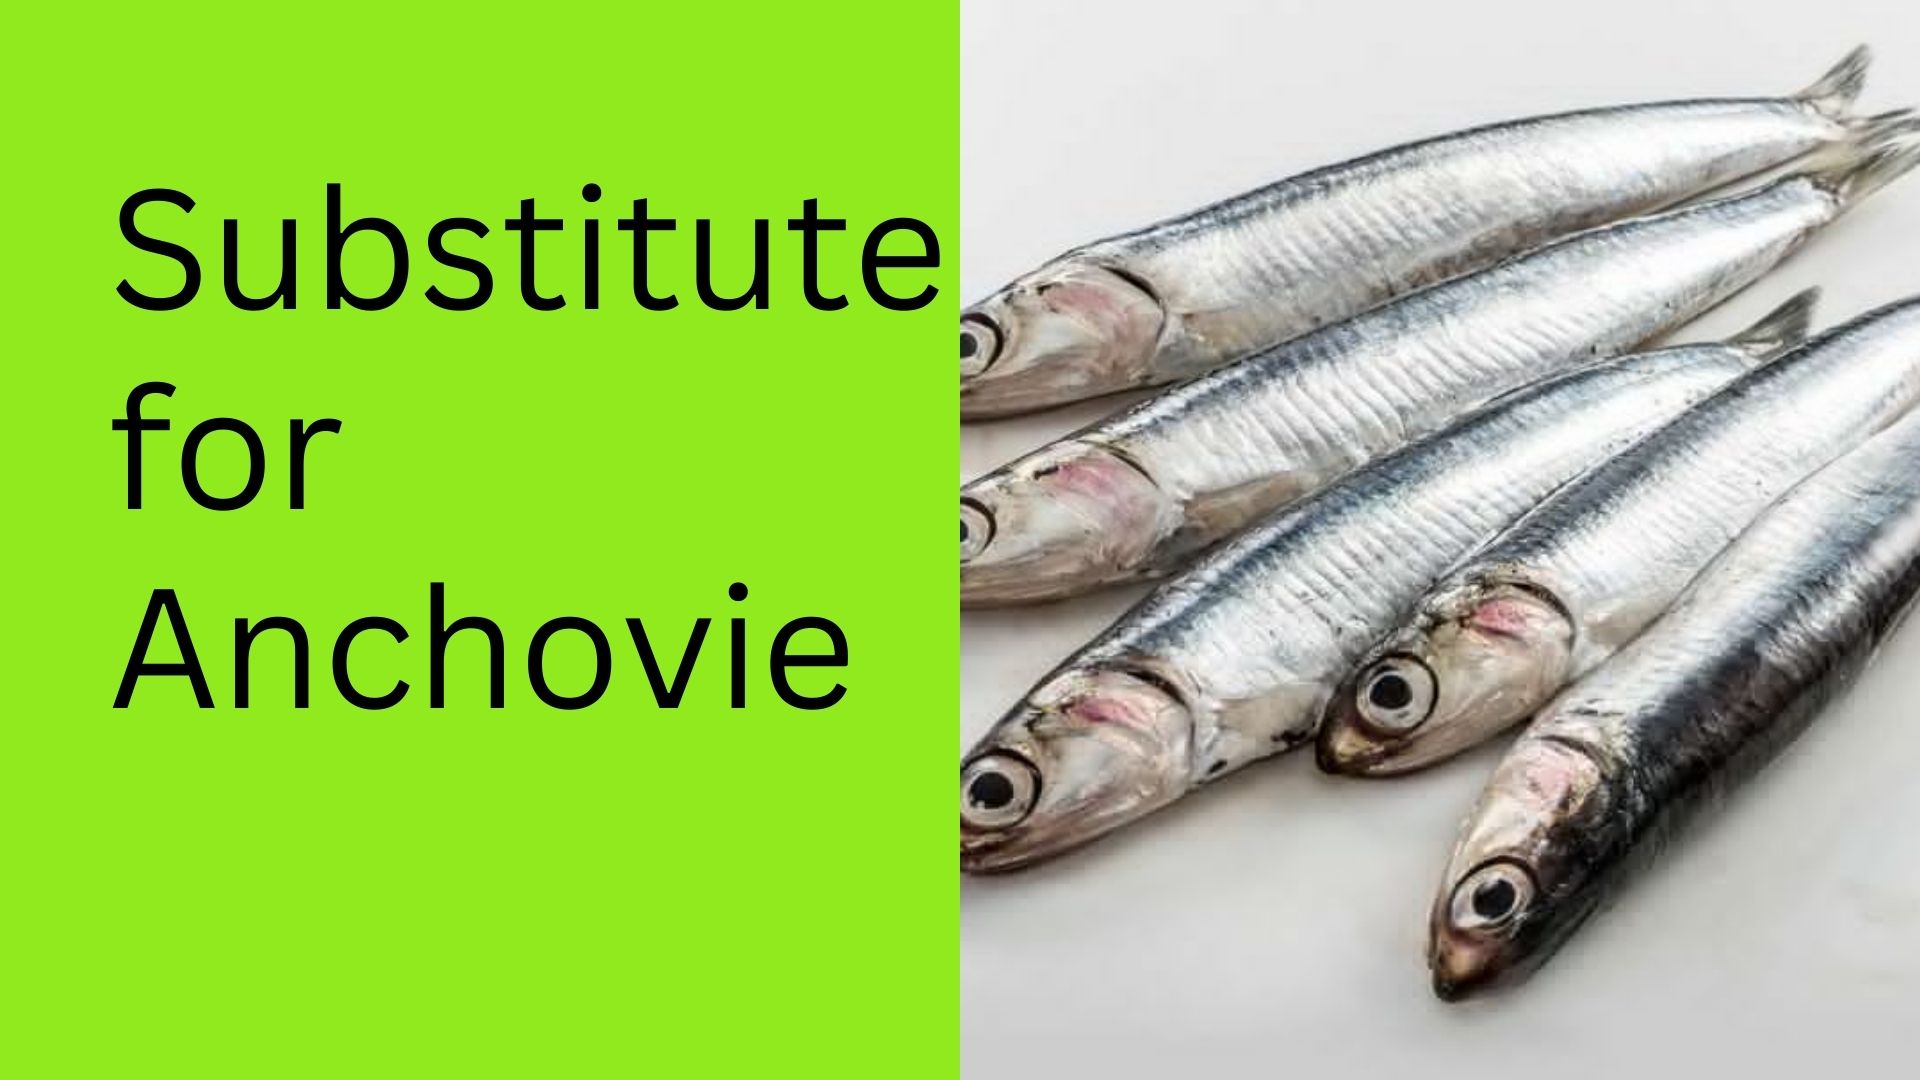 Substitute for Anchovie